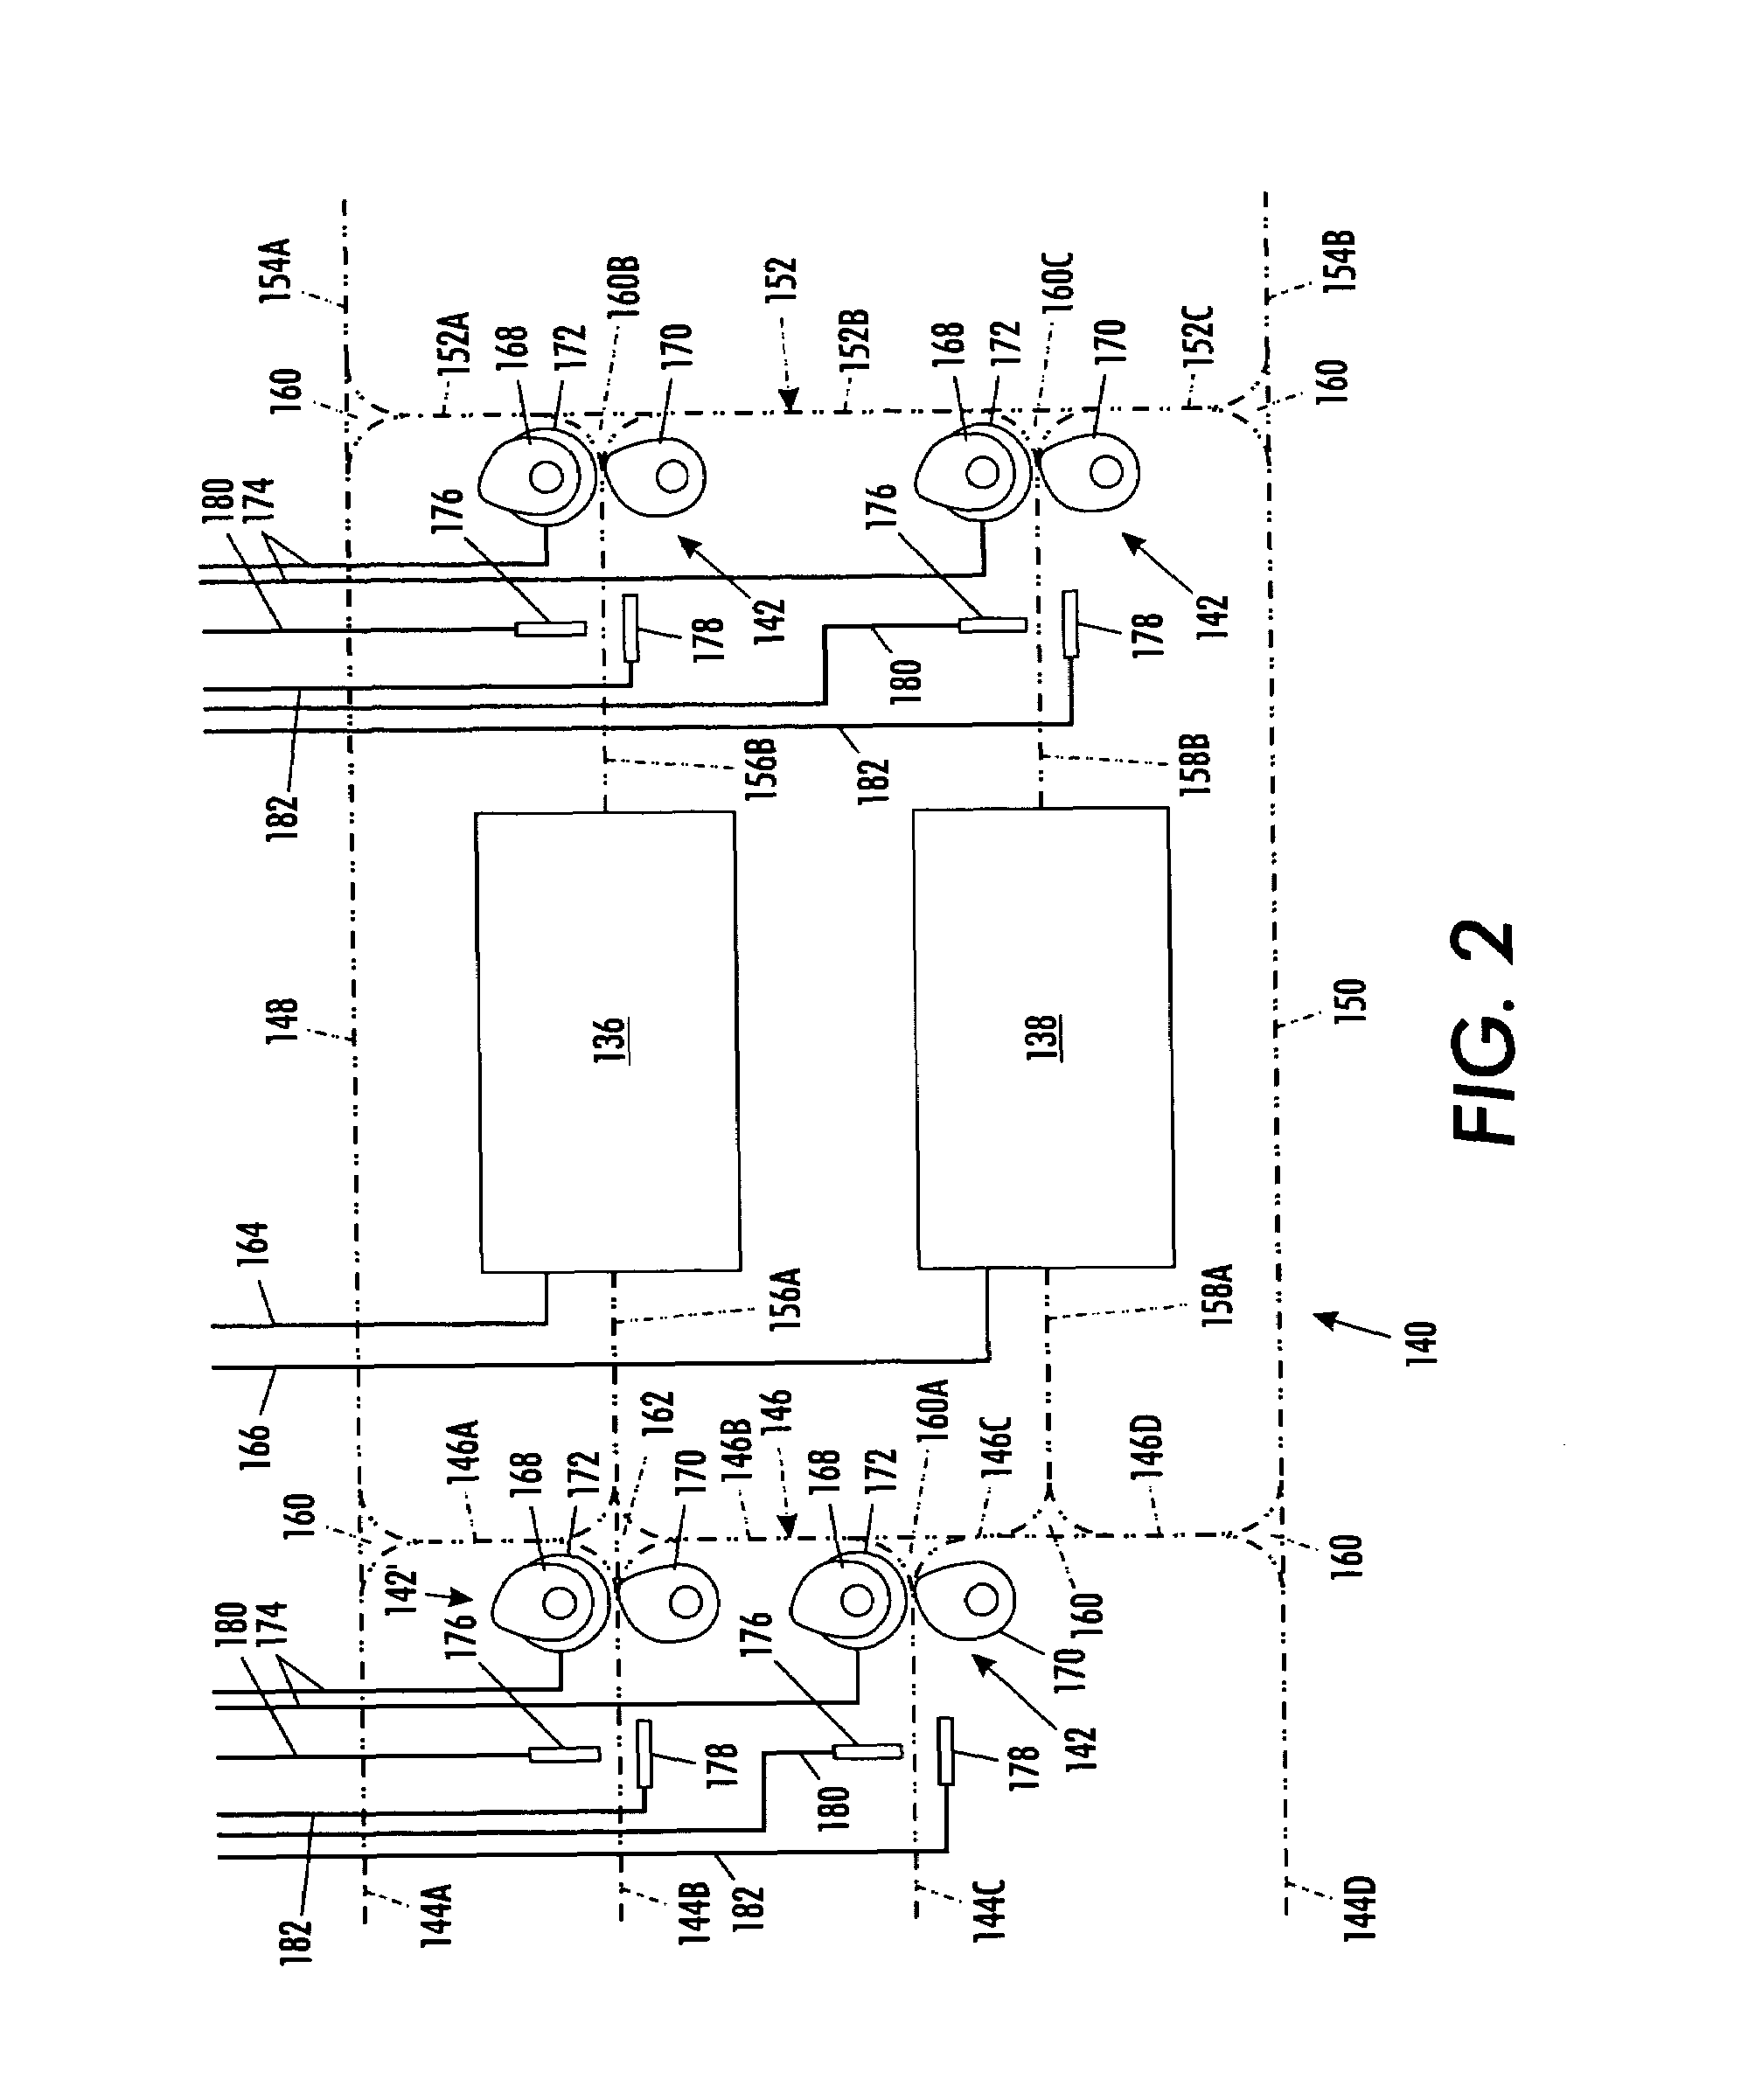 Diverter assembly, printing system and method